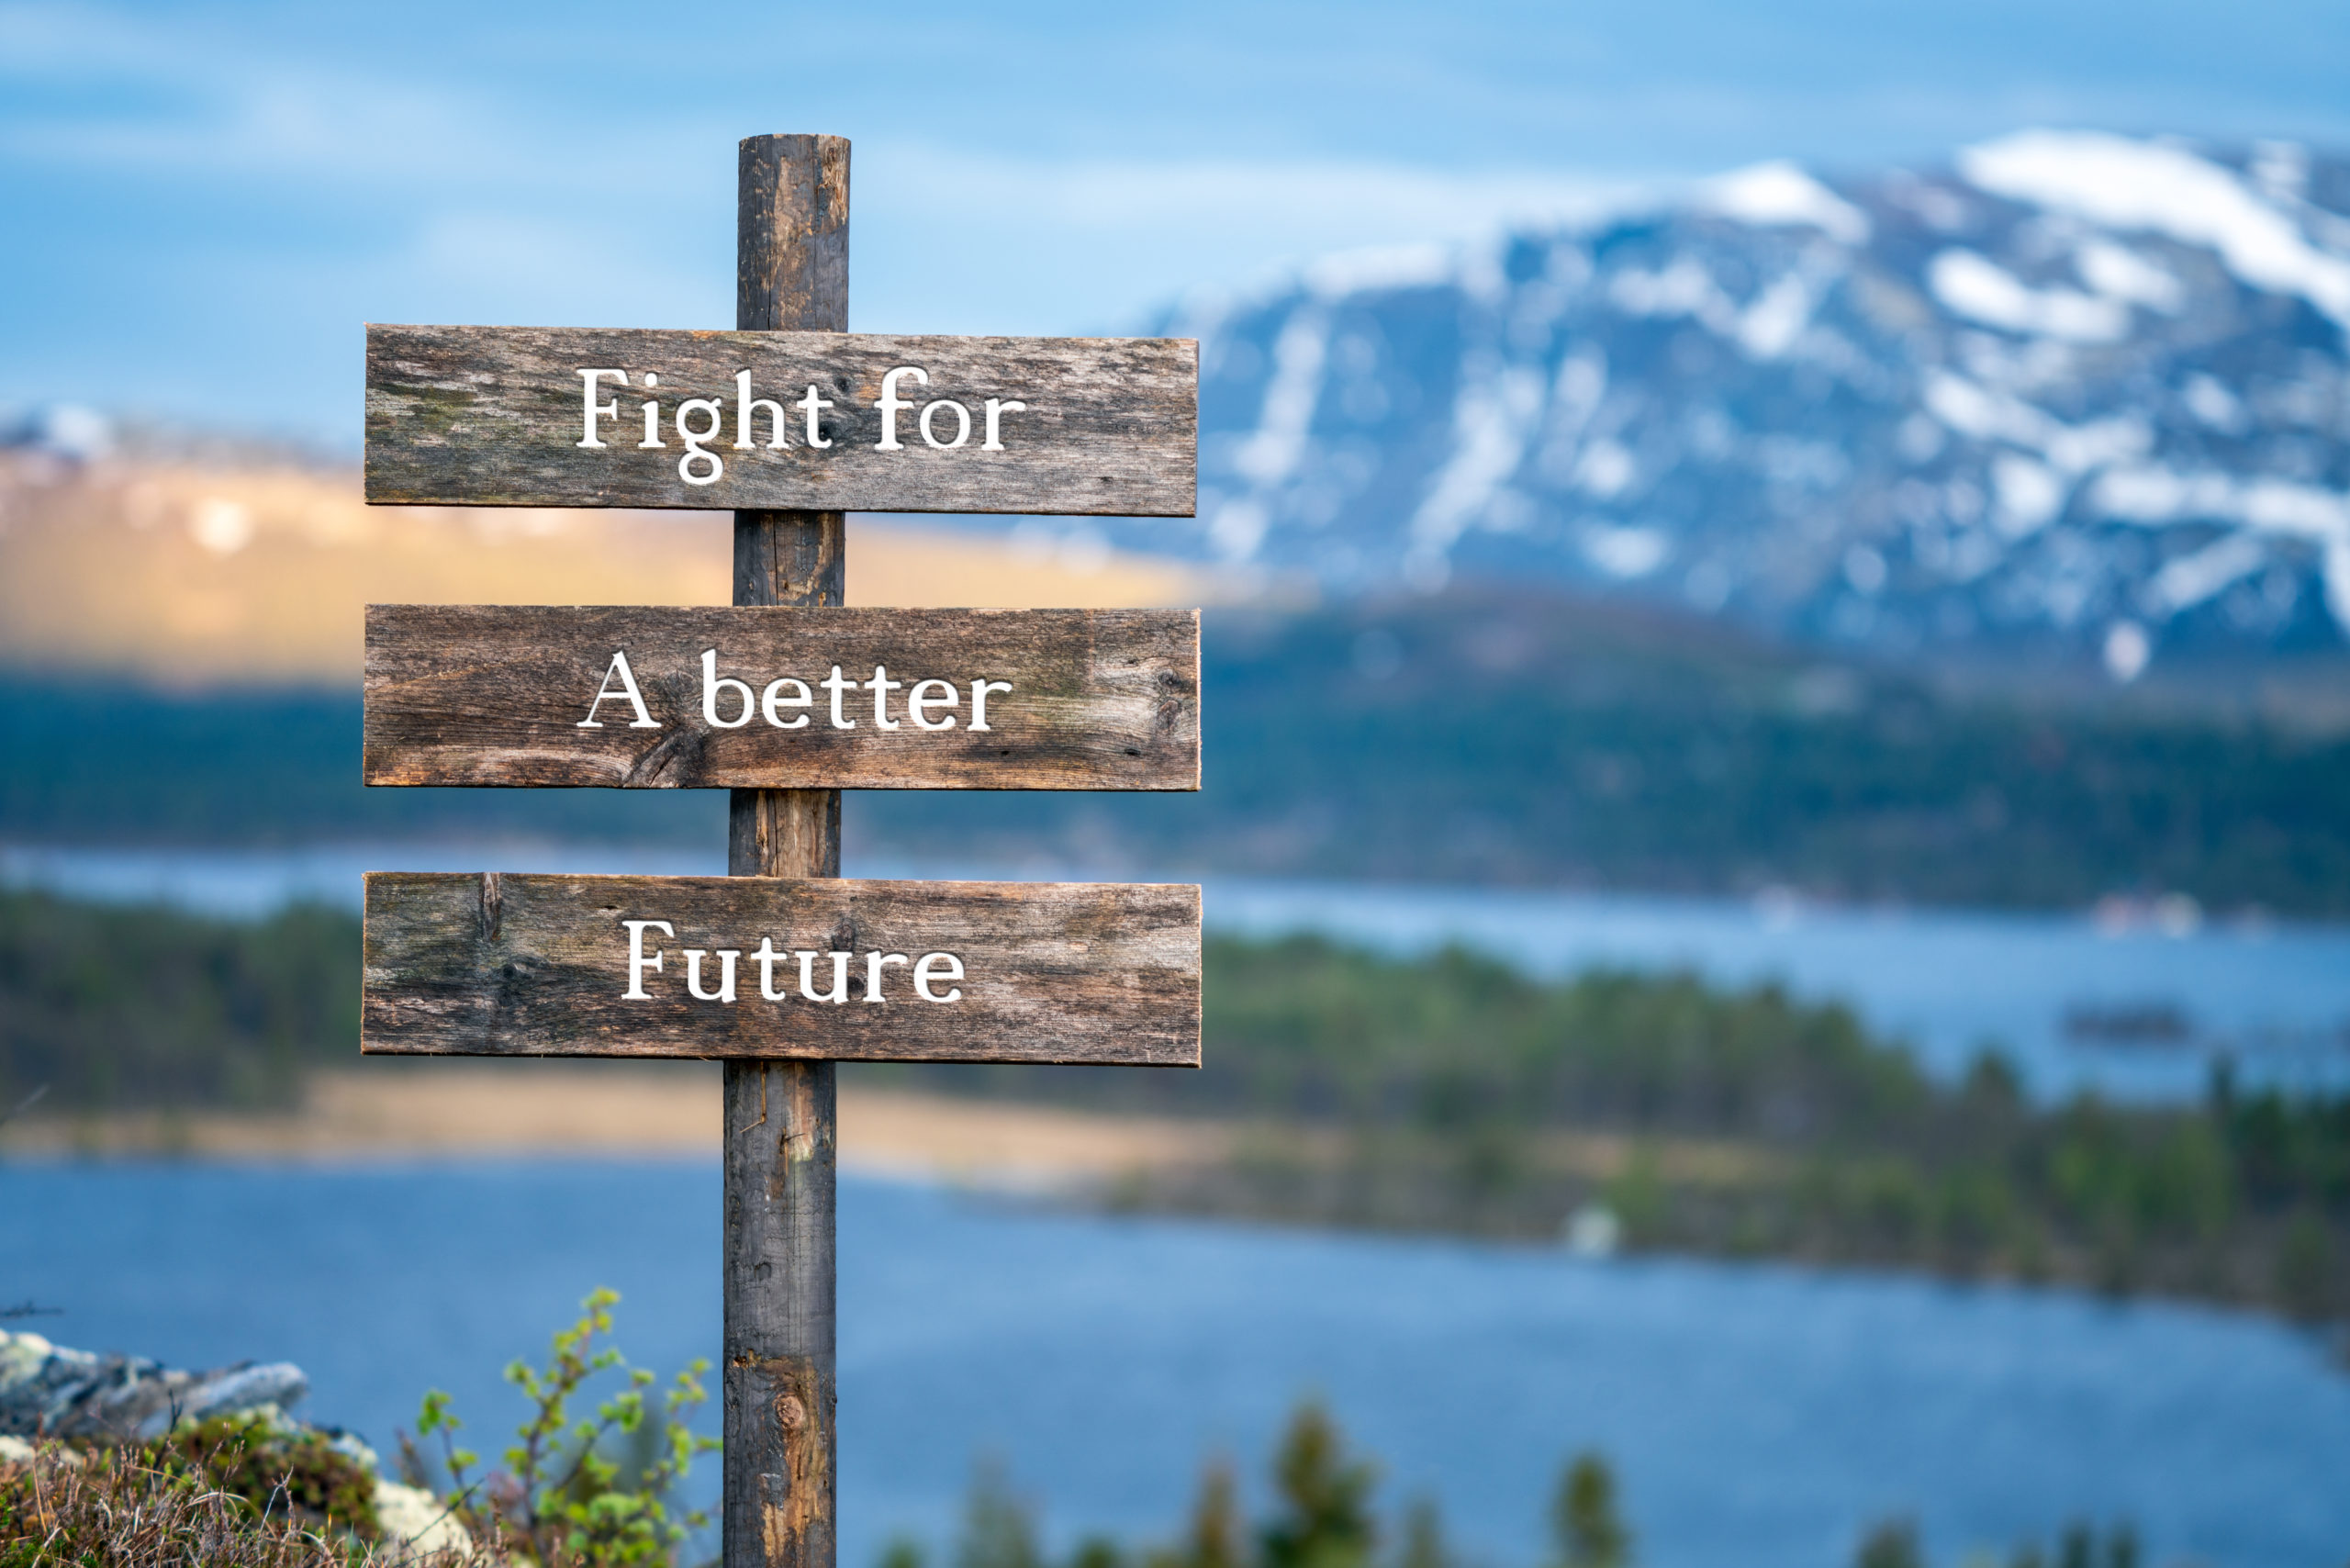 fight for a better future text on wooden signpost outdoors in landscape scenery during blue hour and sunset.